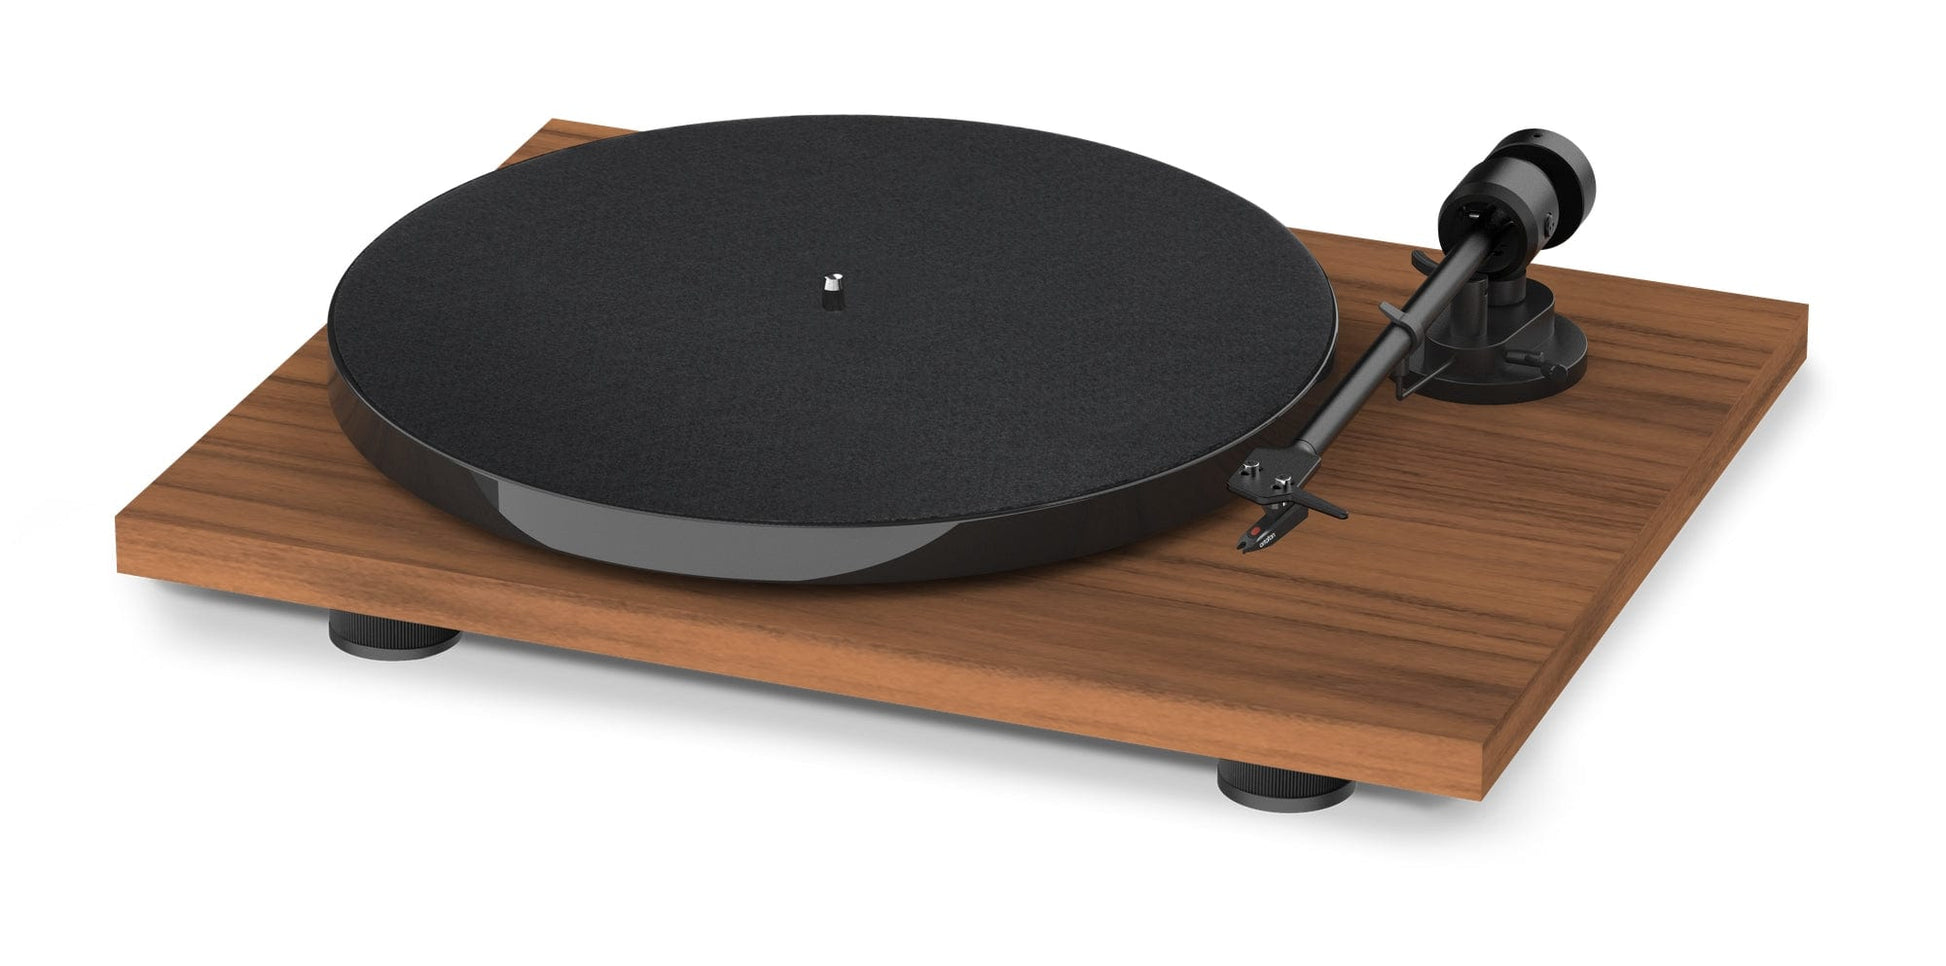 ProJect Audio Systems Turntables ProJect E1 Turntable Phono